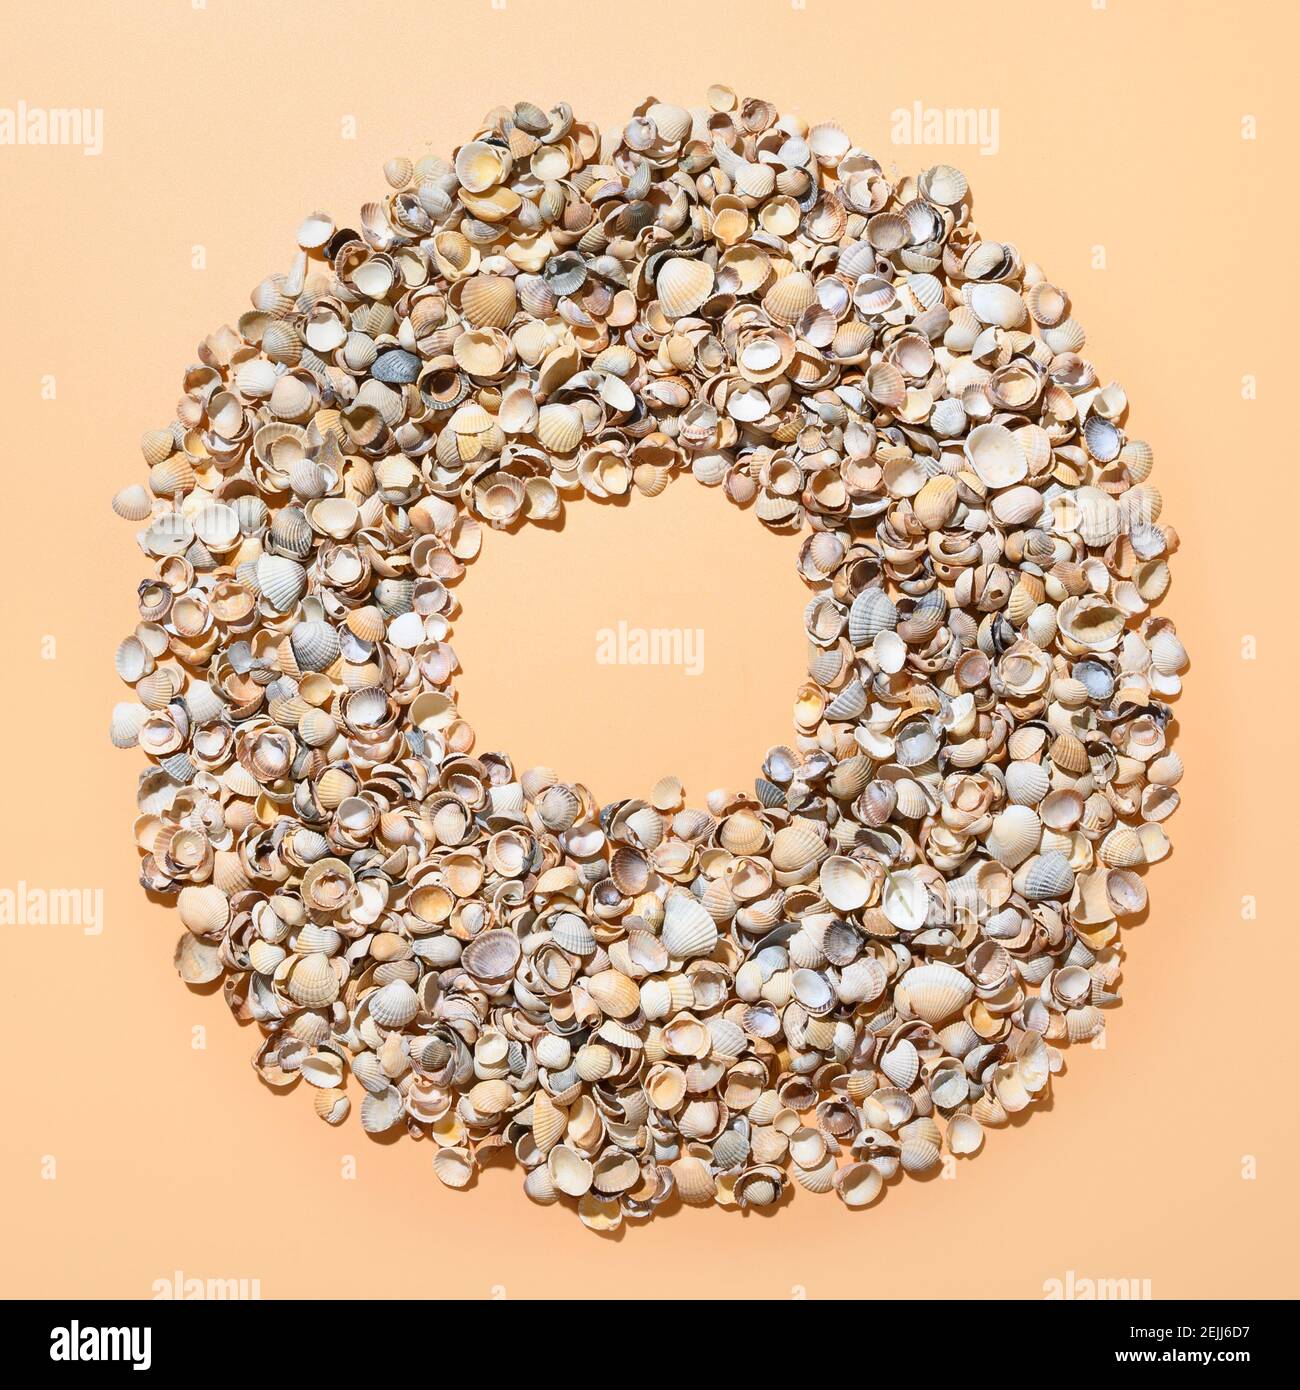 Seashells as wreath with copy space on beige background. View from above. Stock Photo